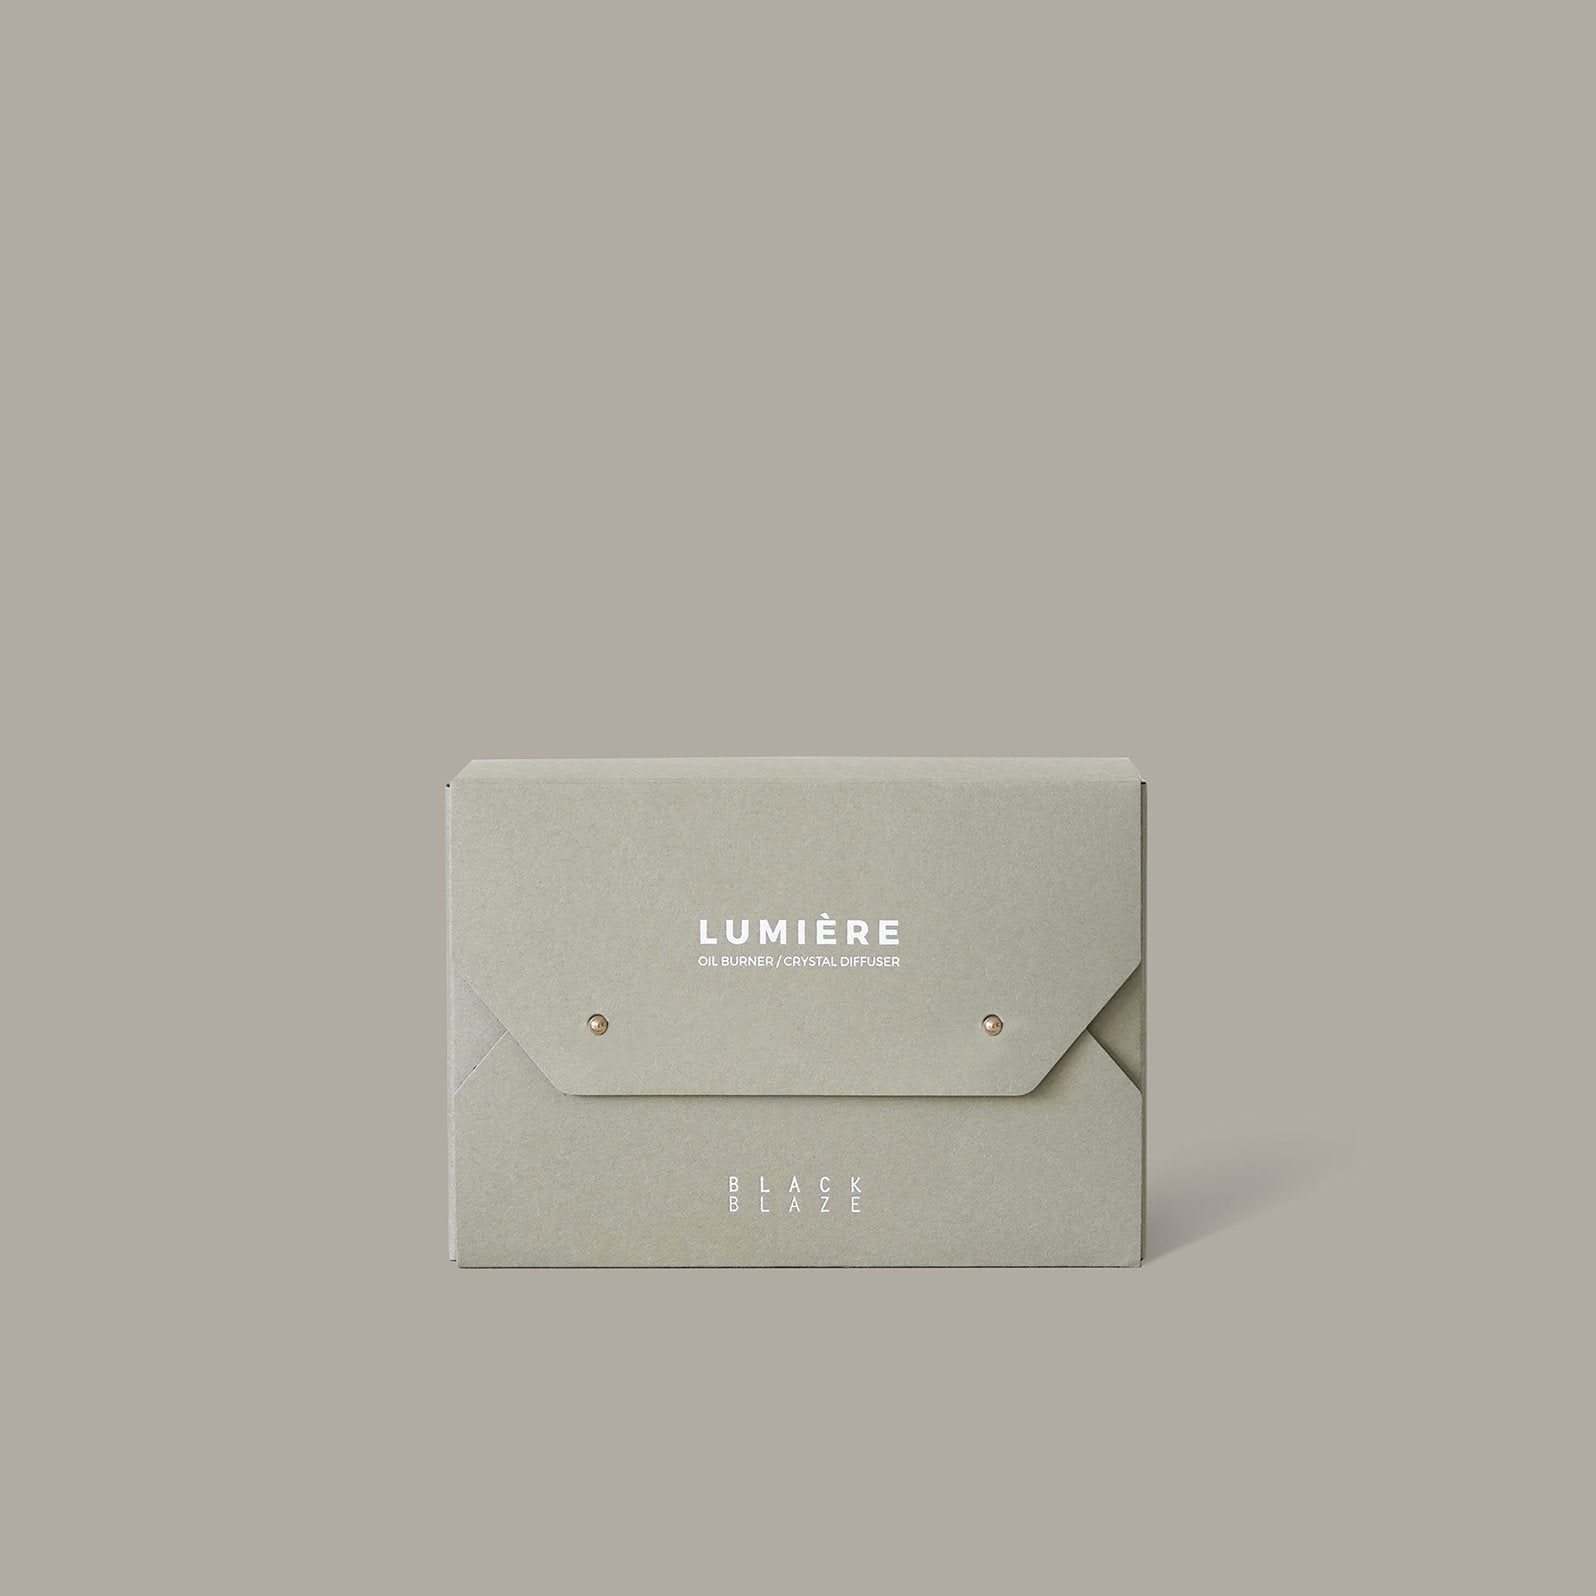 Lights the way for an exploration of scents.Lumiére is minimal in design, letting the smooth lines of a torch stand tall. Acting as a beacon for scent. A platform for exploration. USE AS